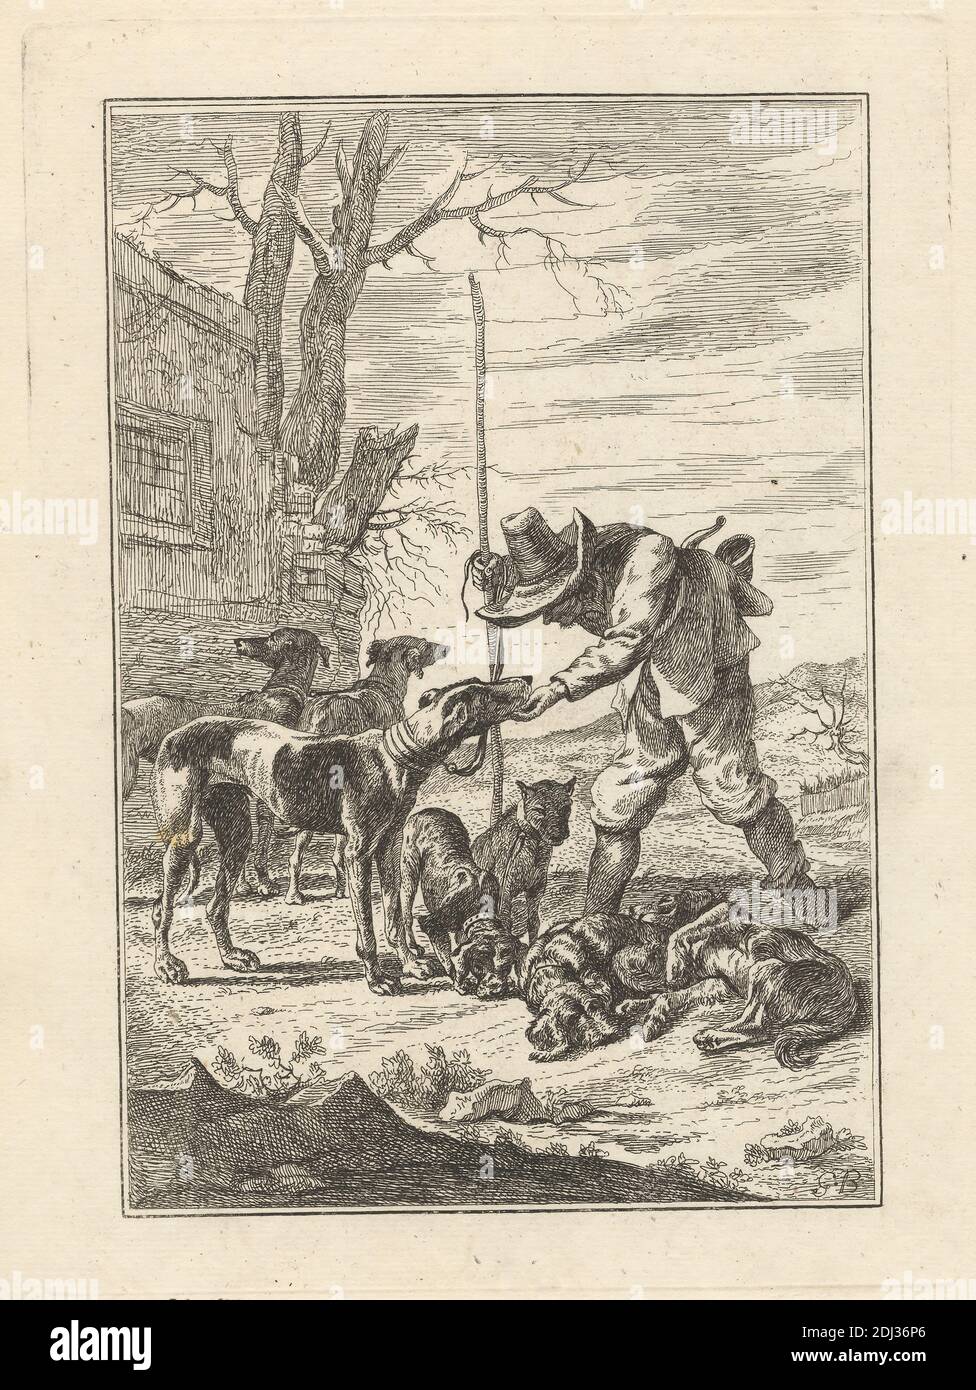 Seven and a man, a PL. For 'A New Drawing Book...of beasts in Various actions' (1 de 9), Print Made by George Bickham, 1683/4–1758, British, After unknown Artist, Published by Henry Overton, 1675/6–1751, British, Undate, Etching on medium, Smooth, Cream, Cream pods, Sheet: 11 7/8 x 7 3/8 pouces (30.2 x 18.7 cm), plaque : 8 1/2 x 6 1/8 pouces (21.6 x 15.6 cm) et image : 7 3/8 x 4 15/16 pouces (18.7 x 12.6 cm), art des animaux, boxeurs (race), bâtiment, nuages, chiens (animaux), genre sujet, lévriers (race), corne, maison, homme, paysan, repos, égratignures, spannels (race), personnel, Terriers (chiens Banque D'Images